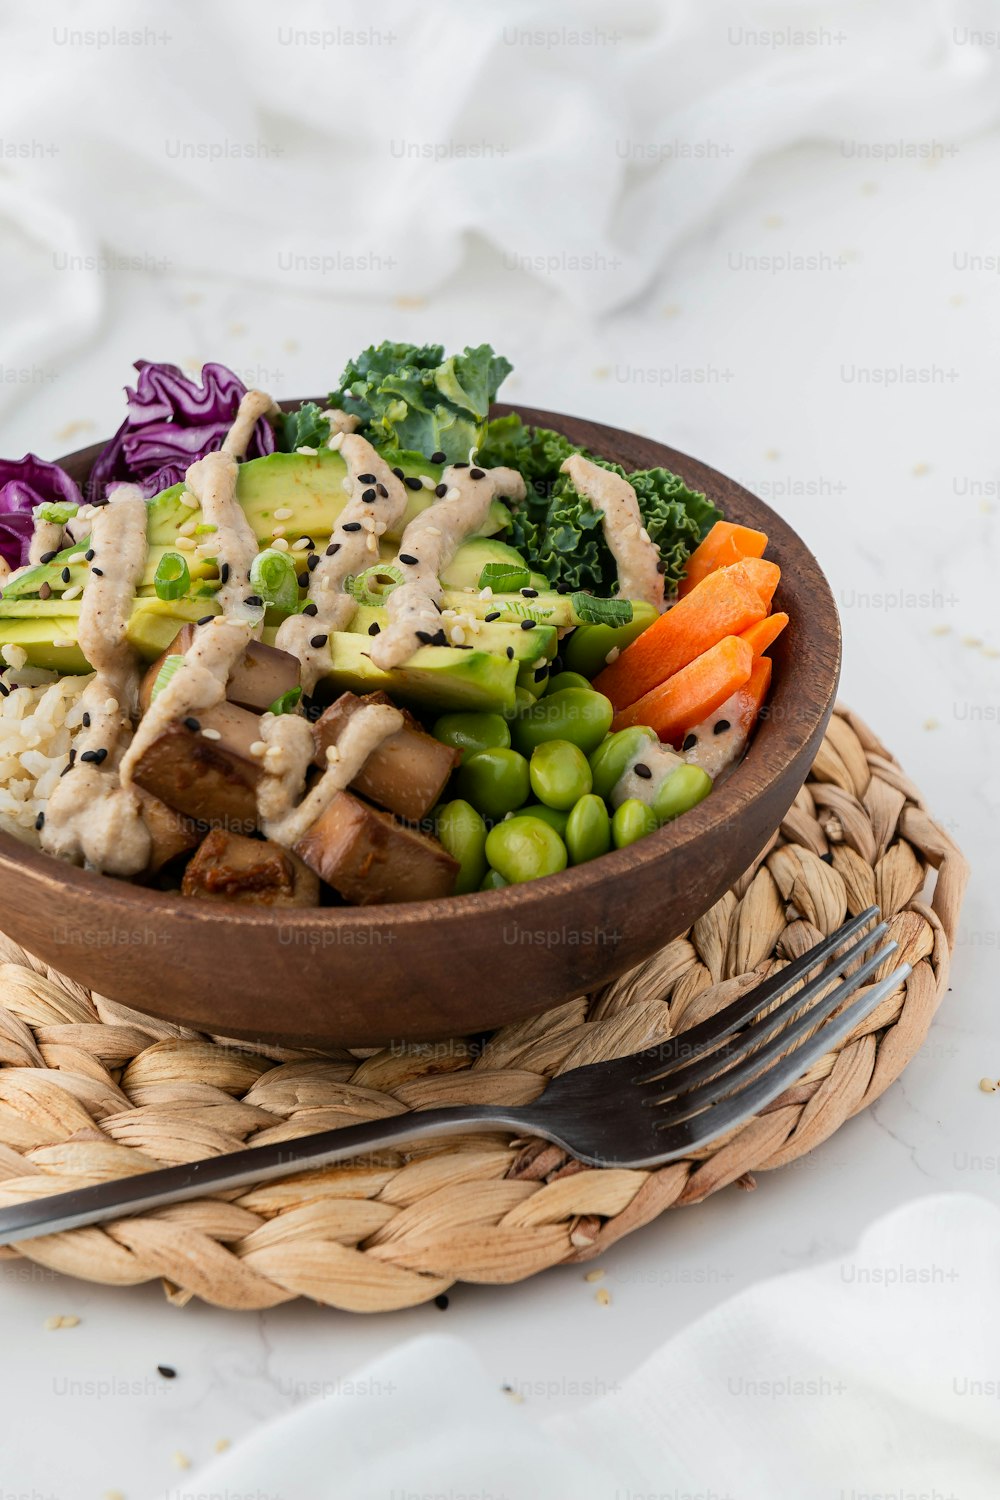 a wooden bowl filled with vegetables and meat